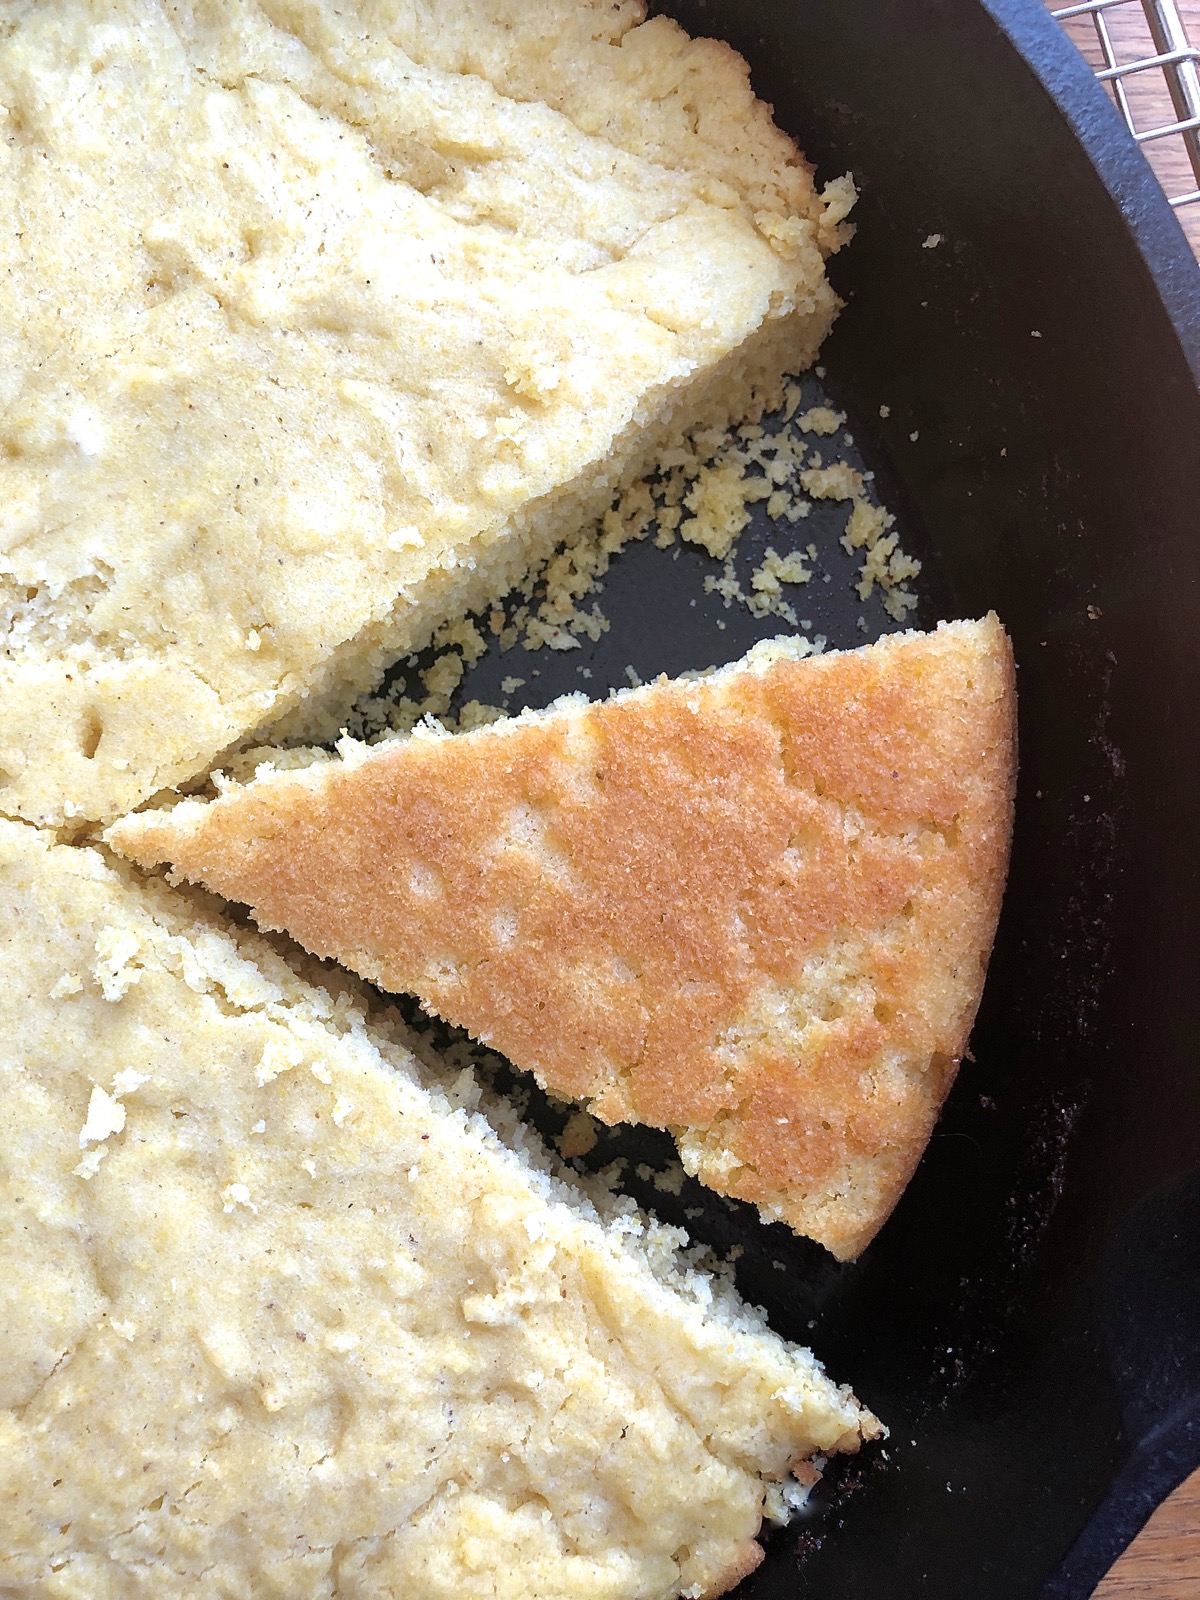 A wedge of baked cornbread turned over in a cast-iron skillet to show its golden brown crust.